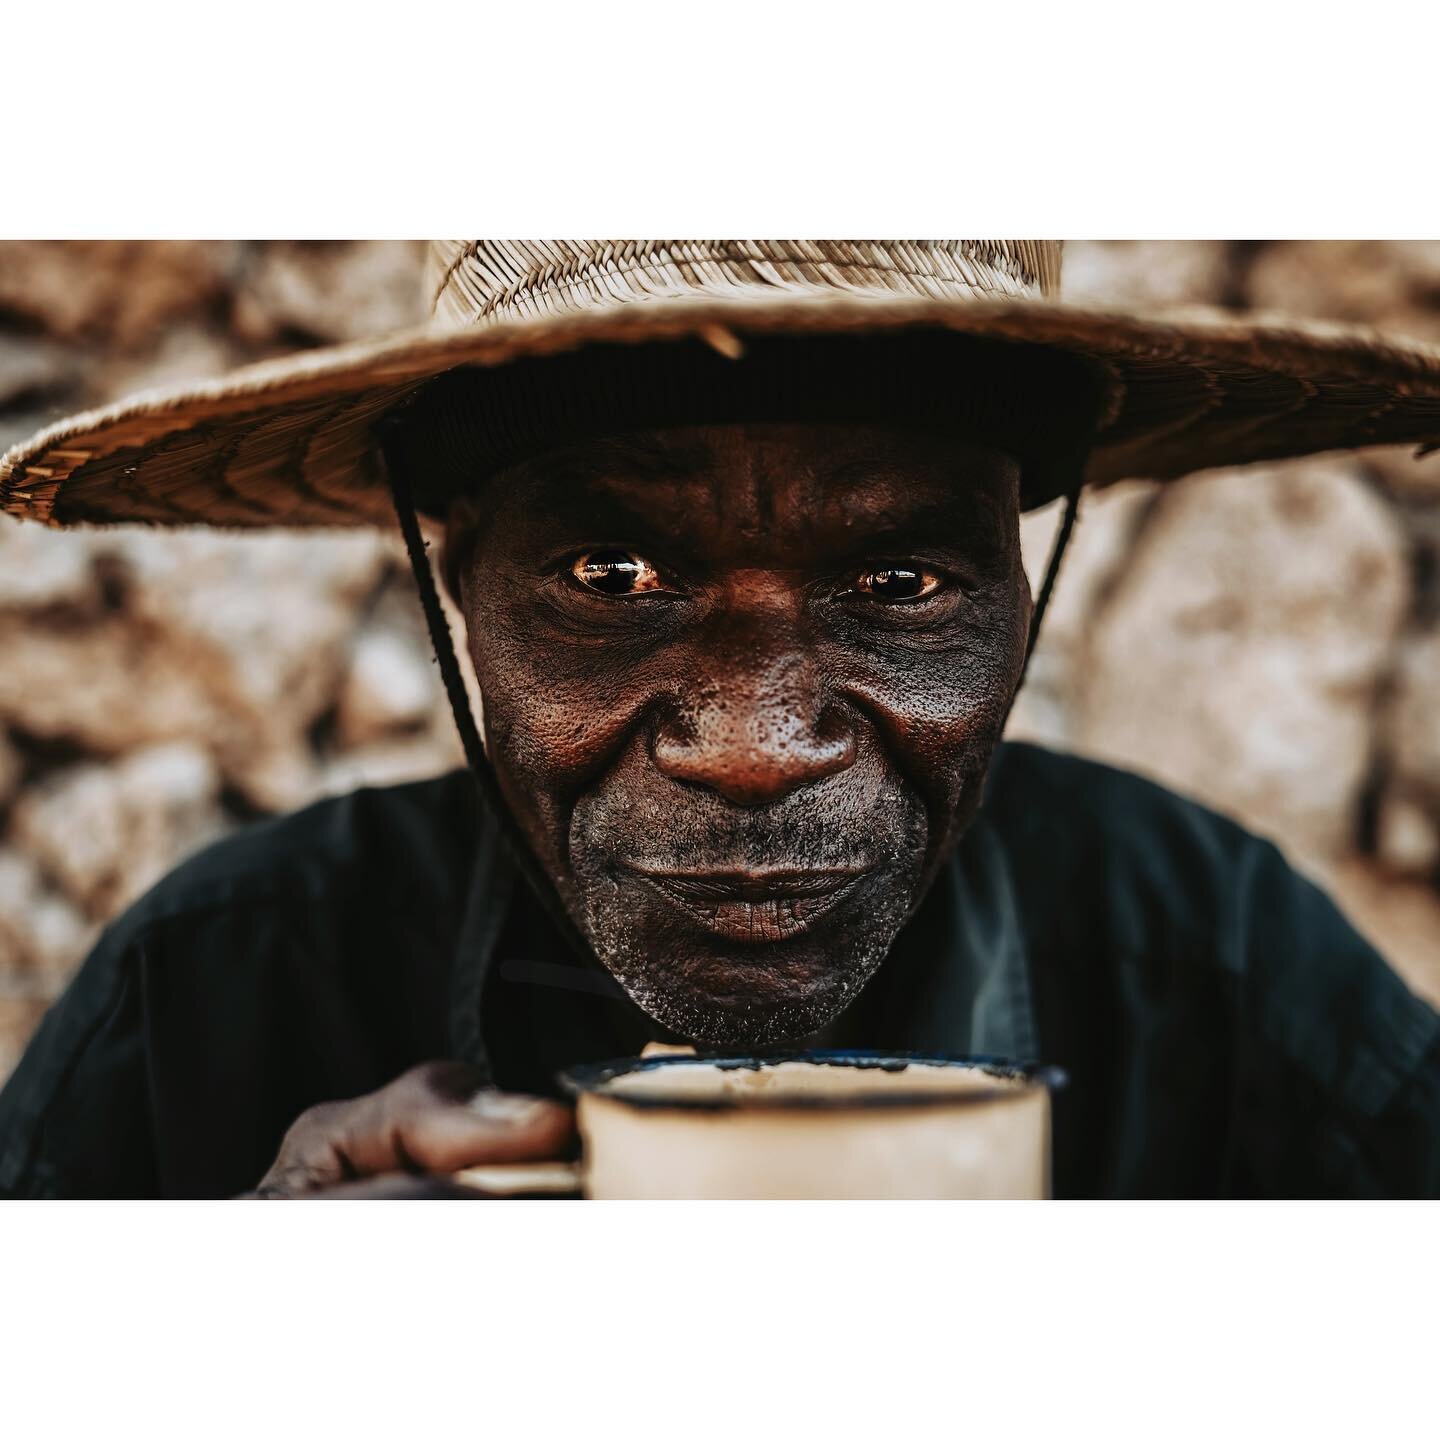 Baba Mzee sipping chai tea &bull; One of my favorite, unexpected things about each time I return to my Turkana friends are the small pieces of past trips. Small tokens of previous memories with friends. For example, the straw hat Baba Mzee is wearing